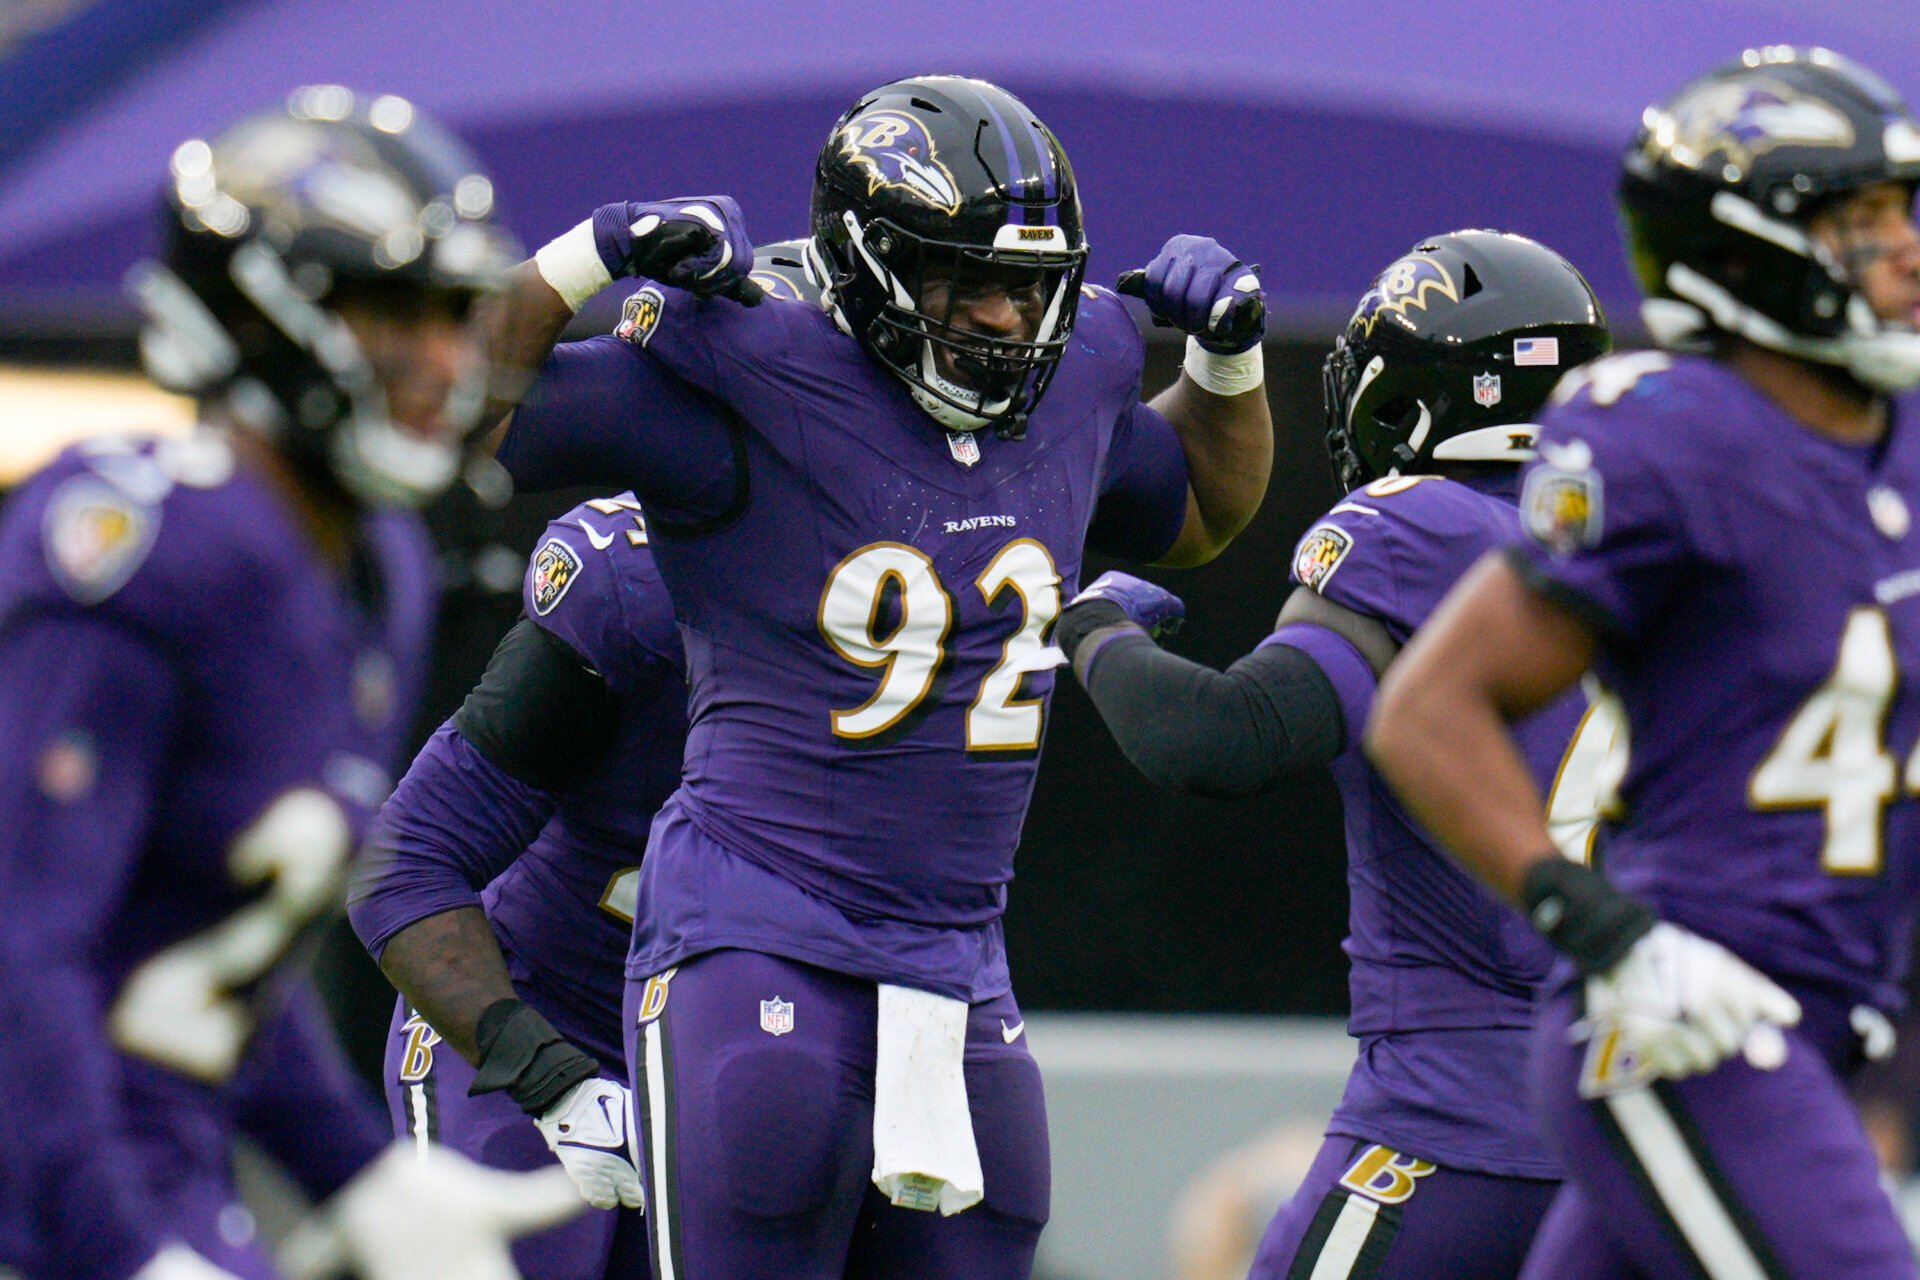 Justin Madubuike's Contract Details: DT Re-Signs With Ravens for $98 Million Ahead of NFL Free Agency